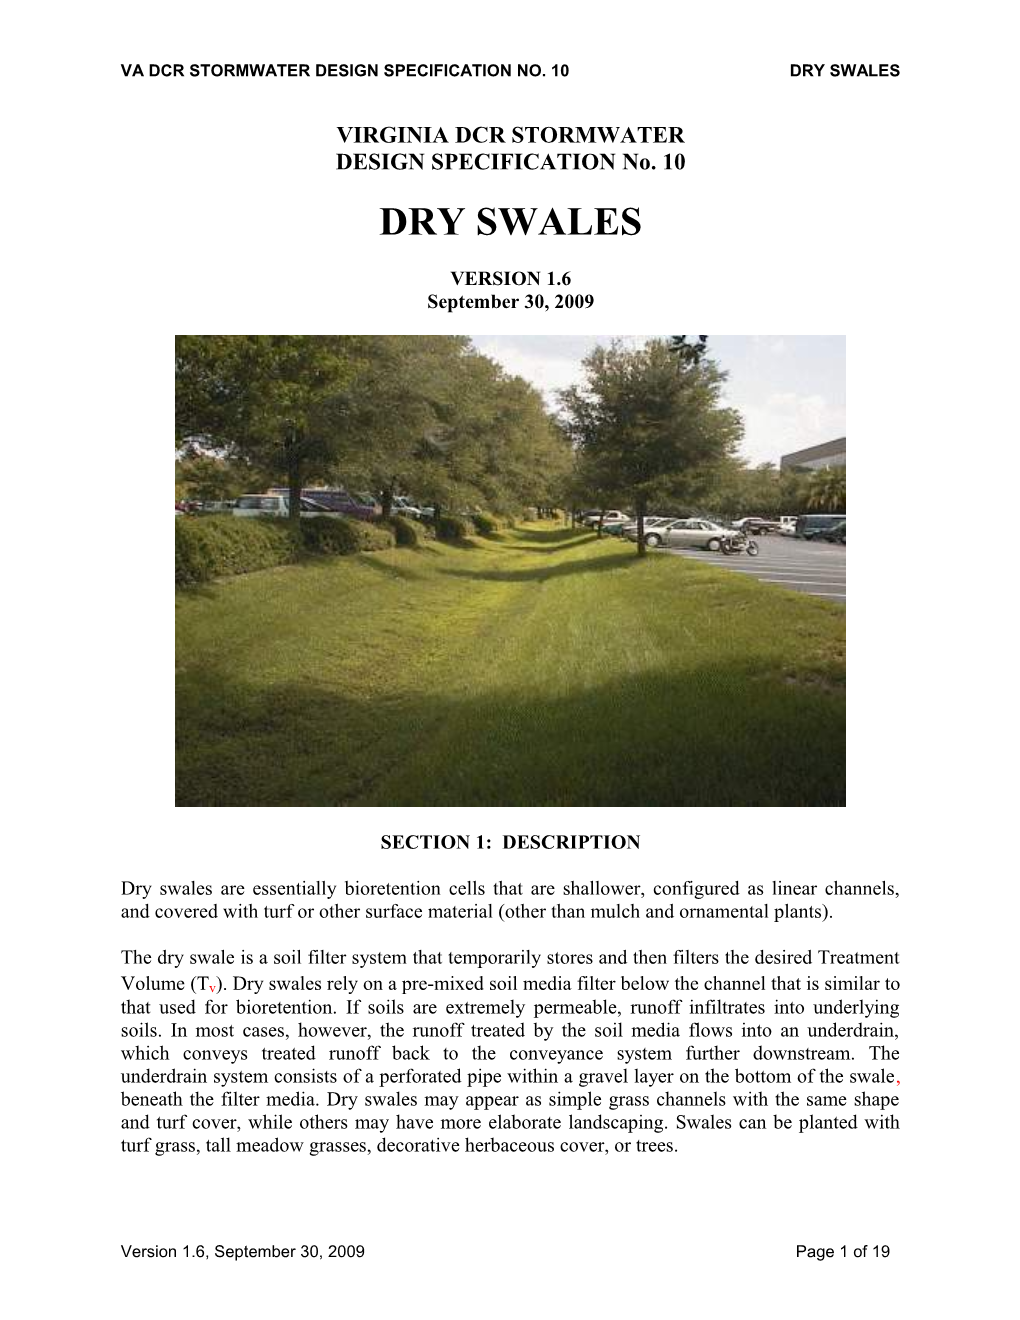 Va Dcr Stormwater Design Specification No. 10Dry Swales